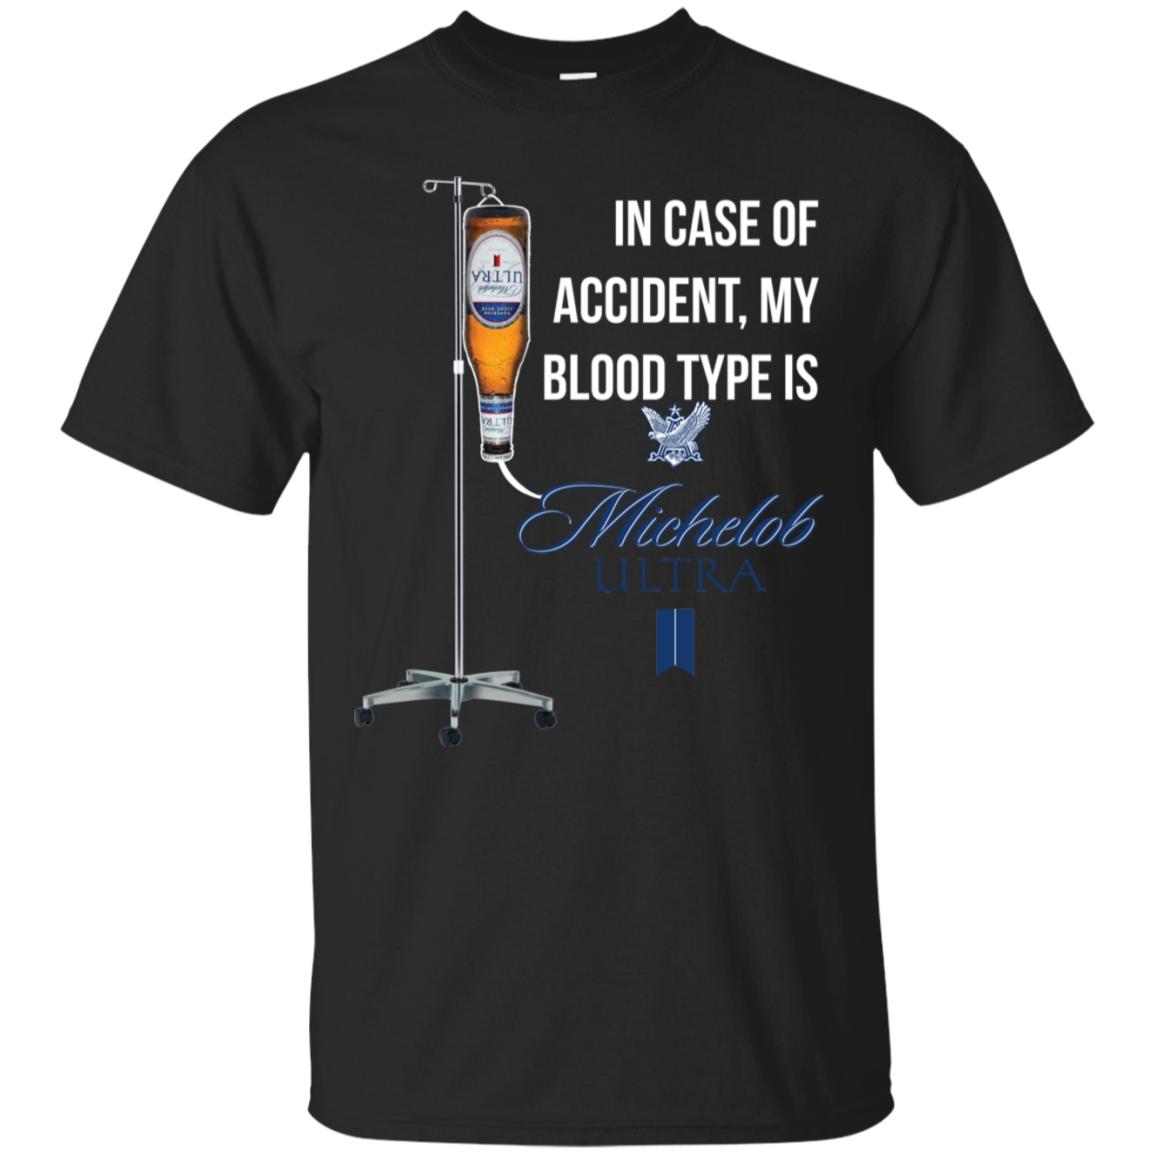 In Case of Accident My Blood Type Is Michelob Ultra T-Shirt KA12